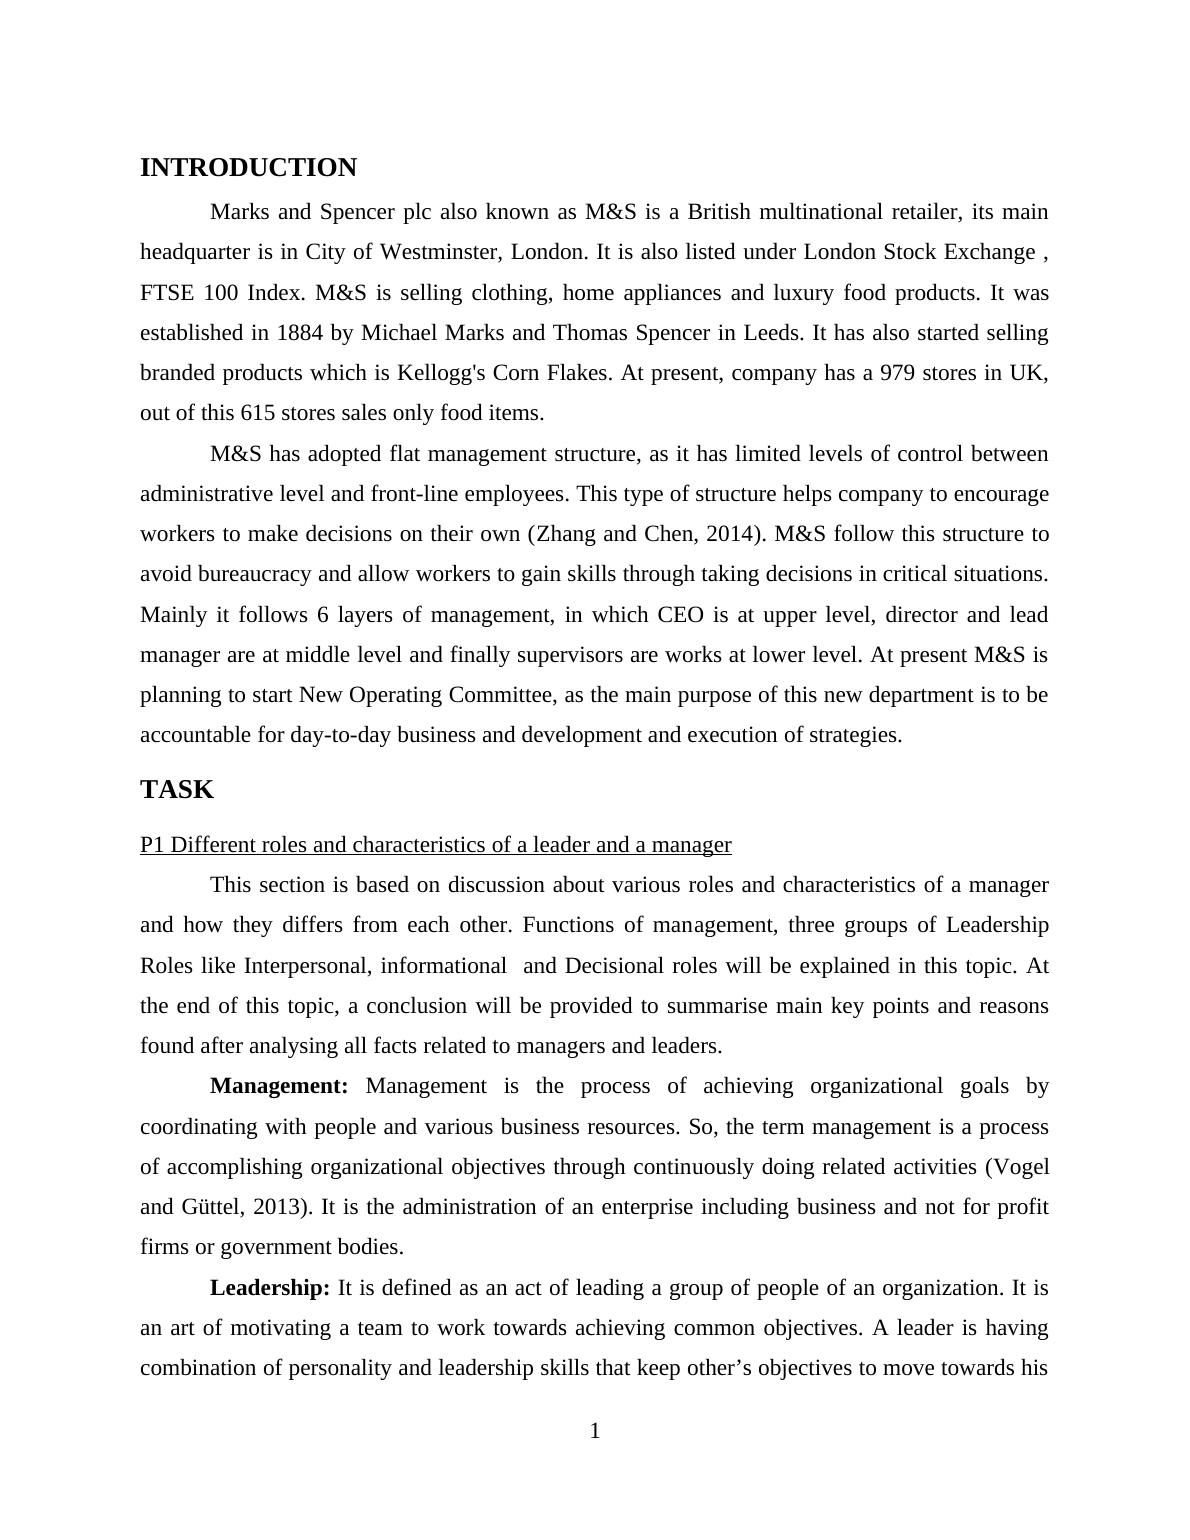 Management Operation Assignment of M&S_4